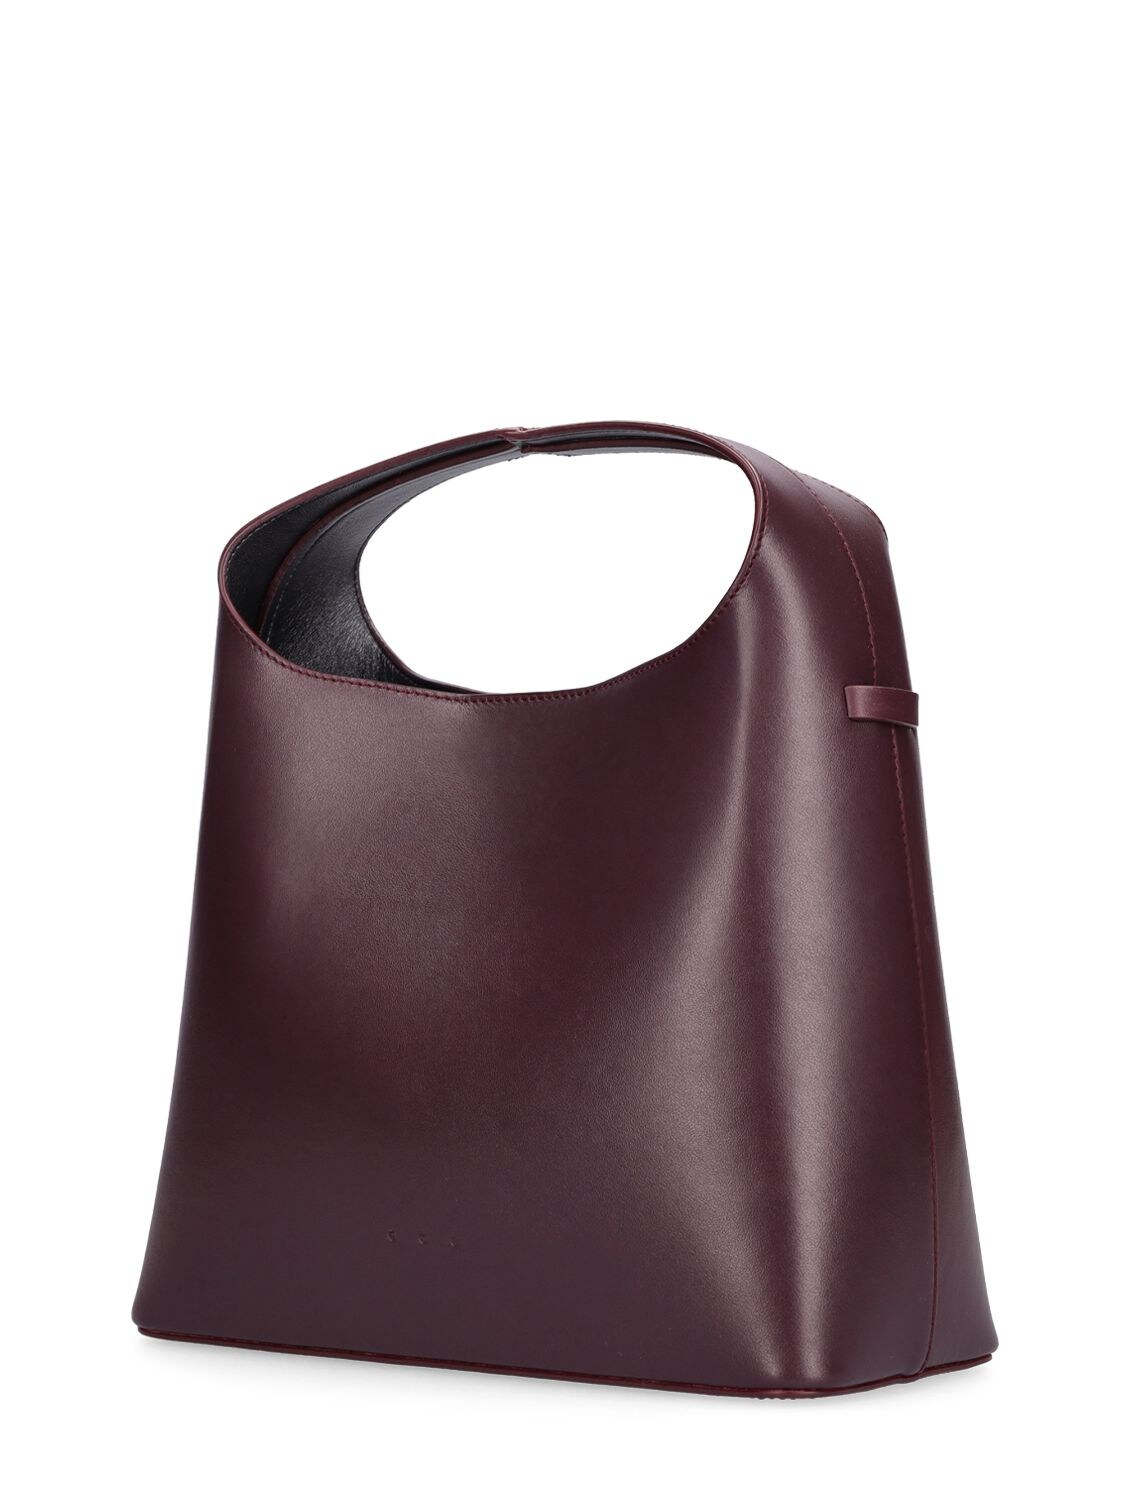 Aesther Ekme Sway Tote Ns in Purple